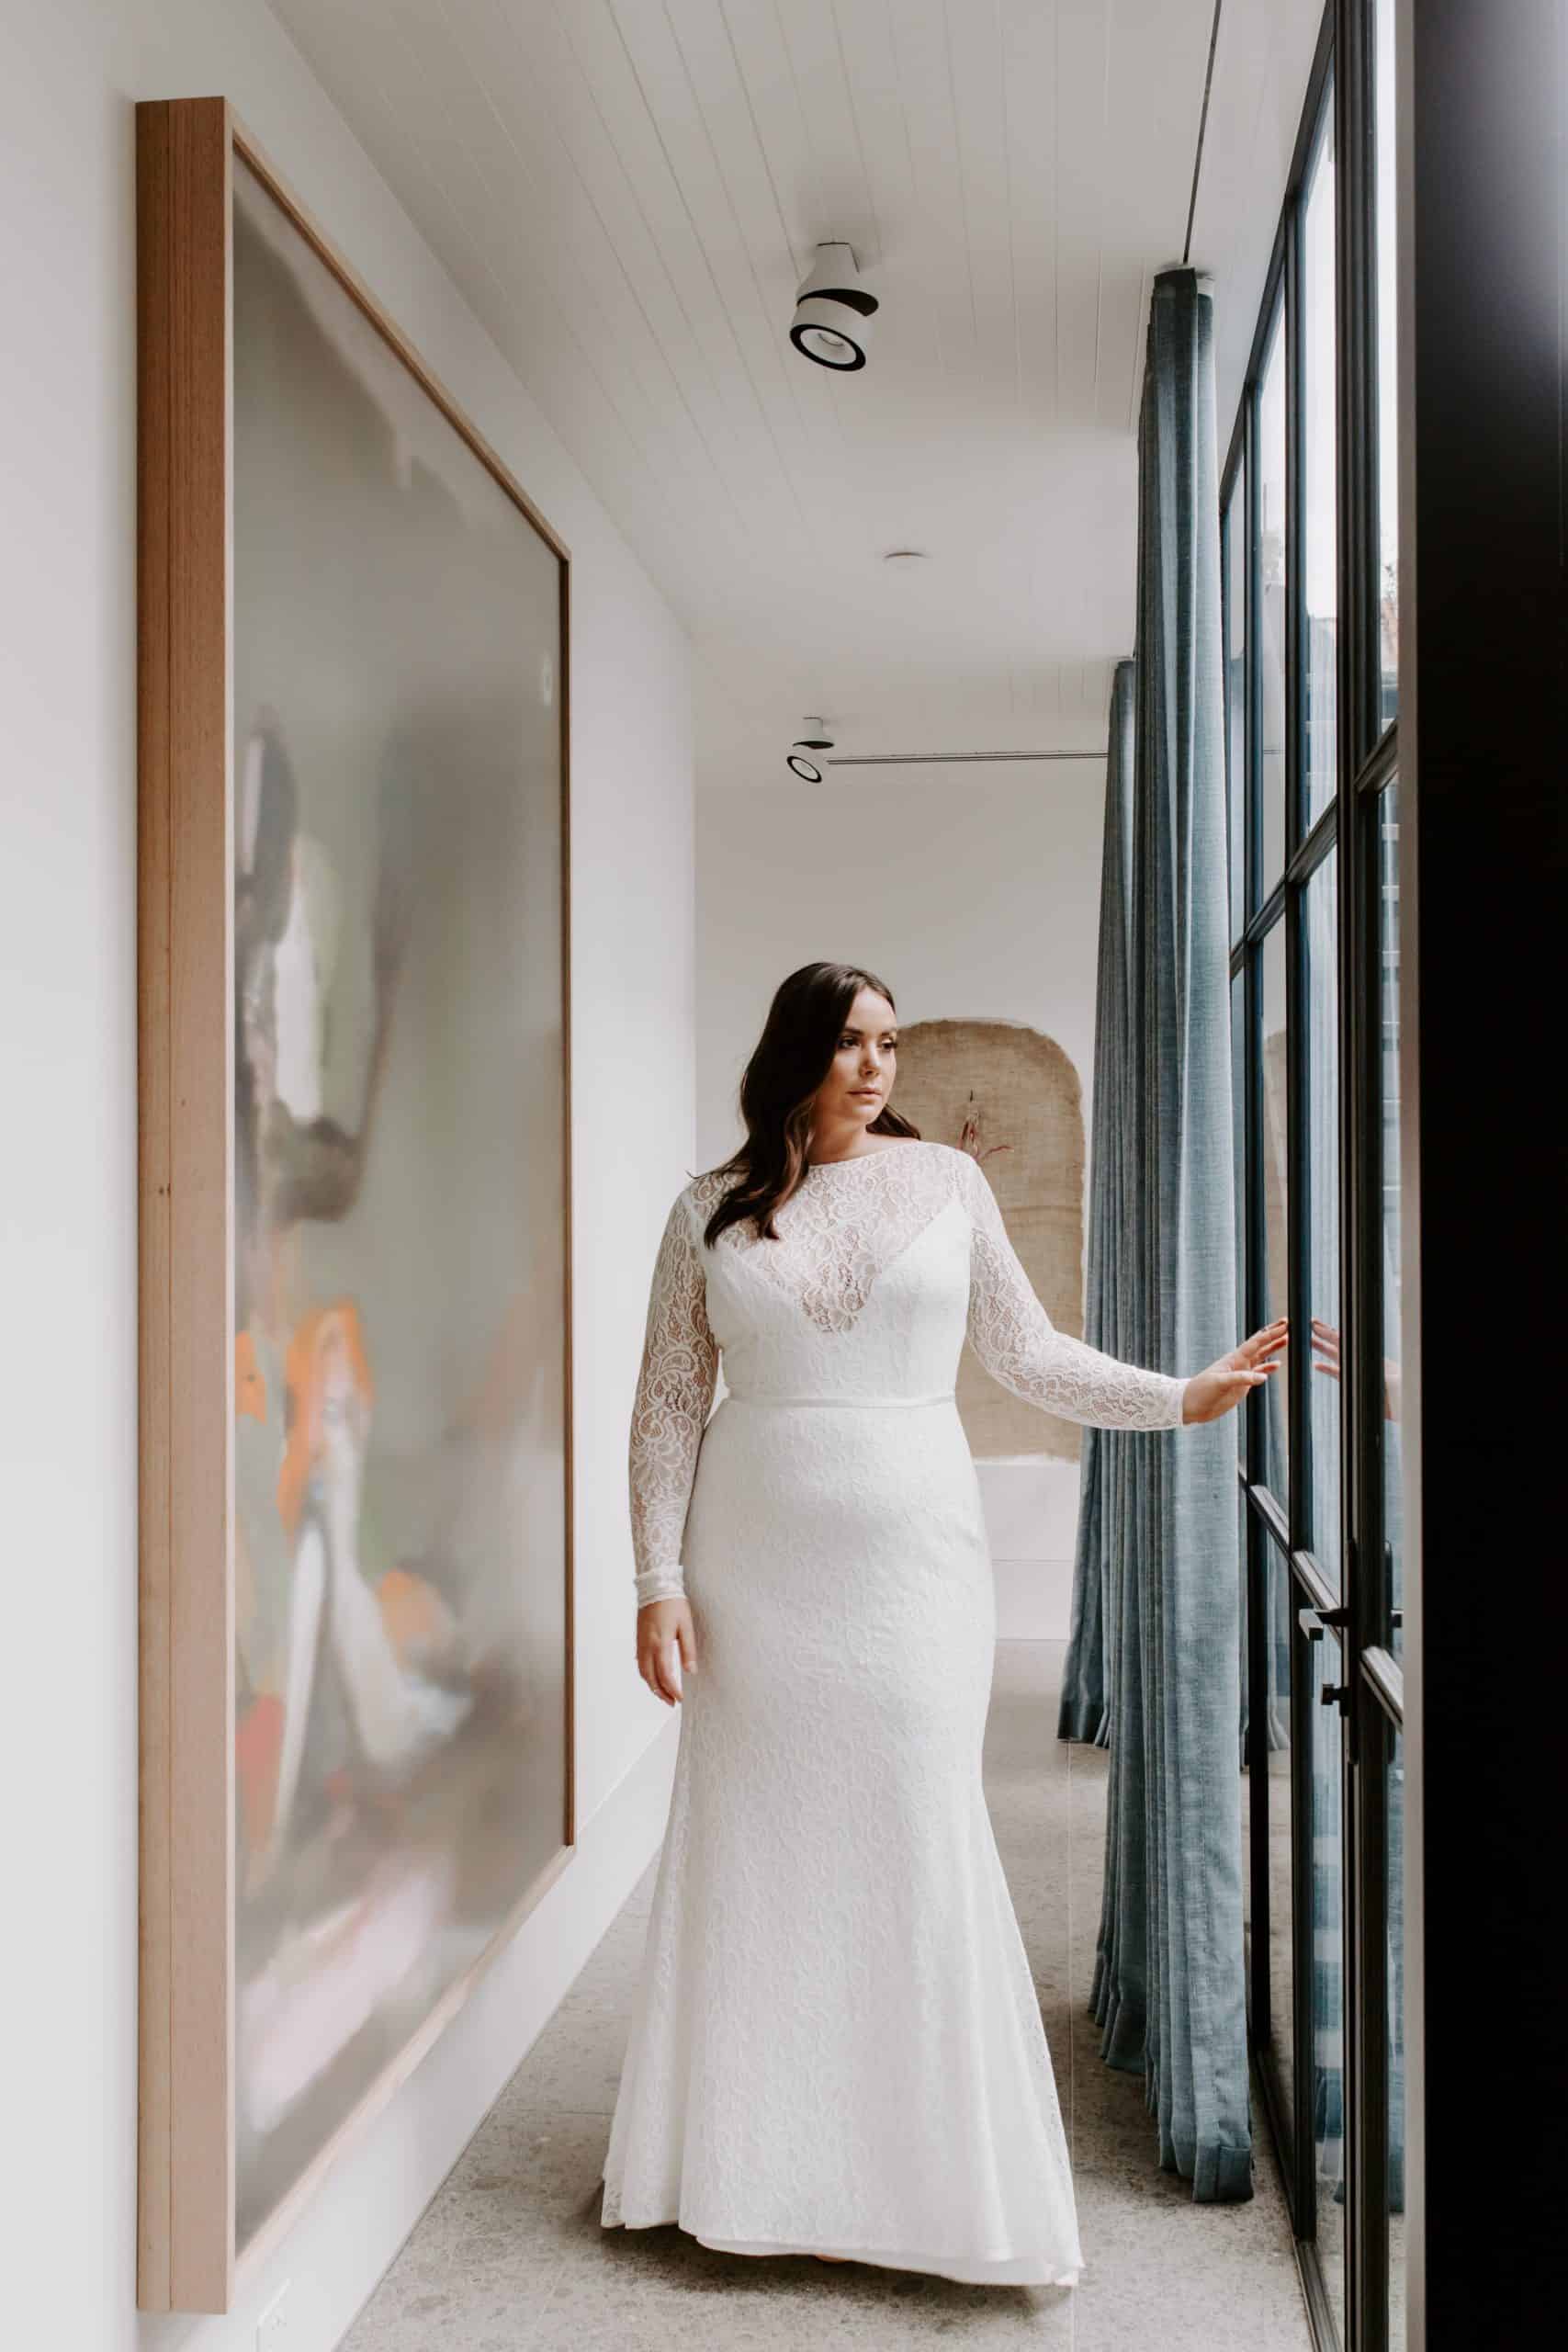 What to wear under your wedding dress - Silhouette Tailoring Studio